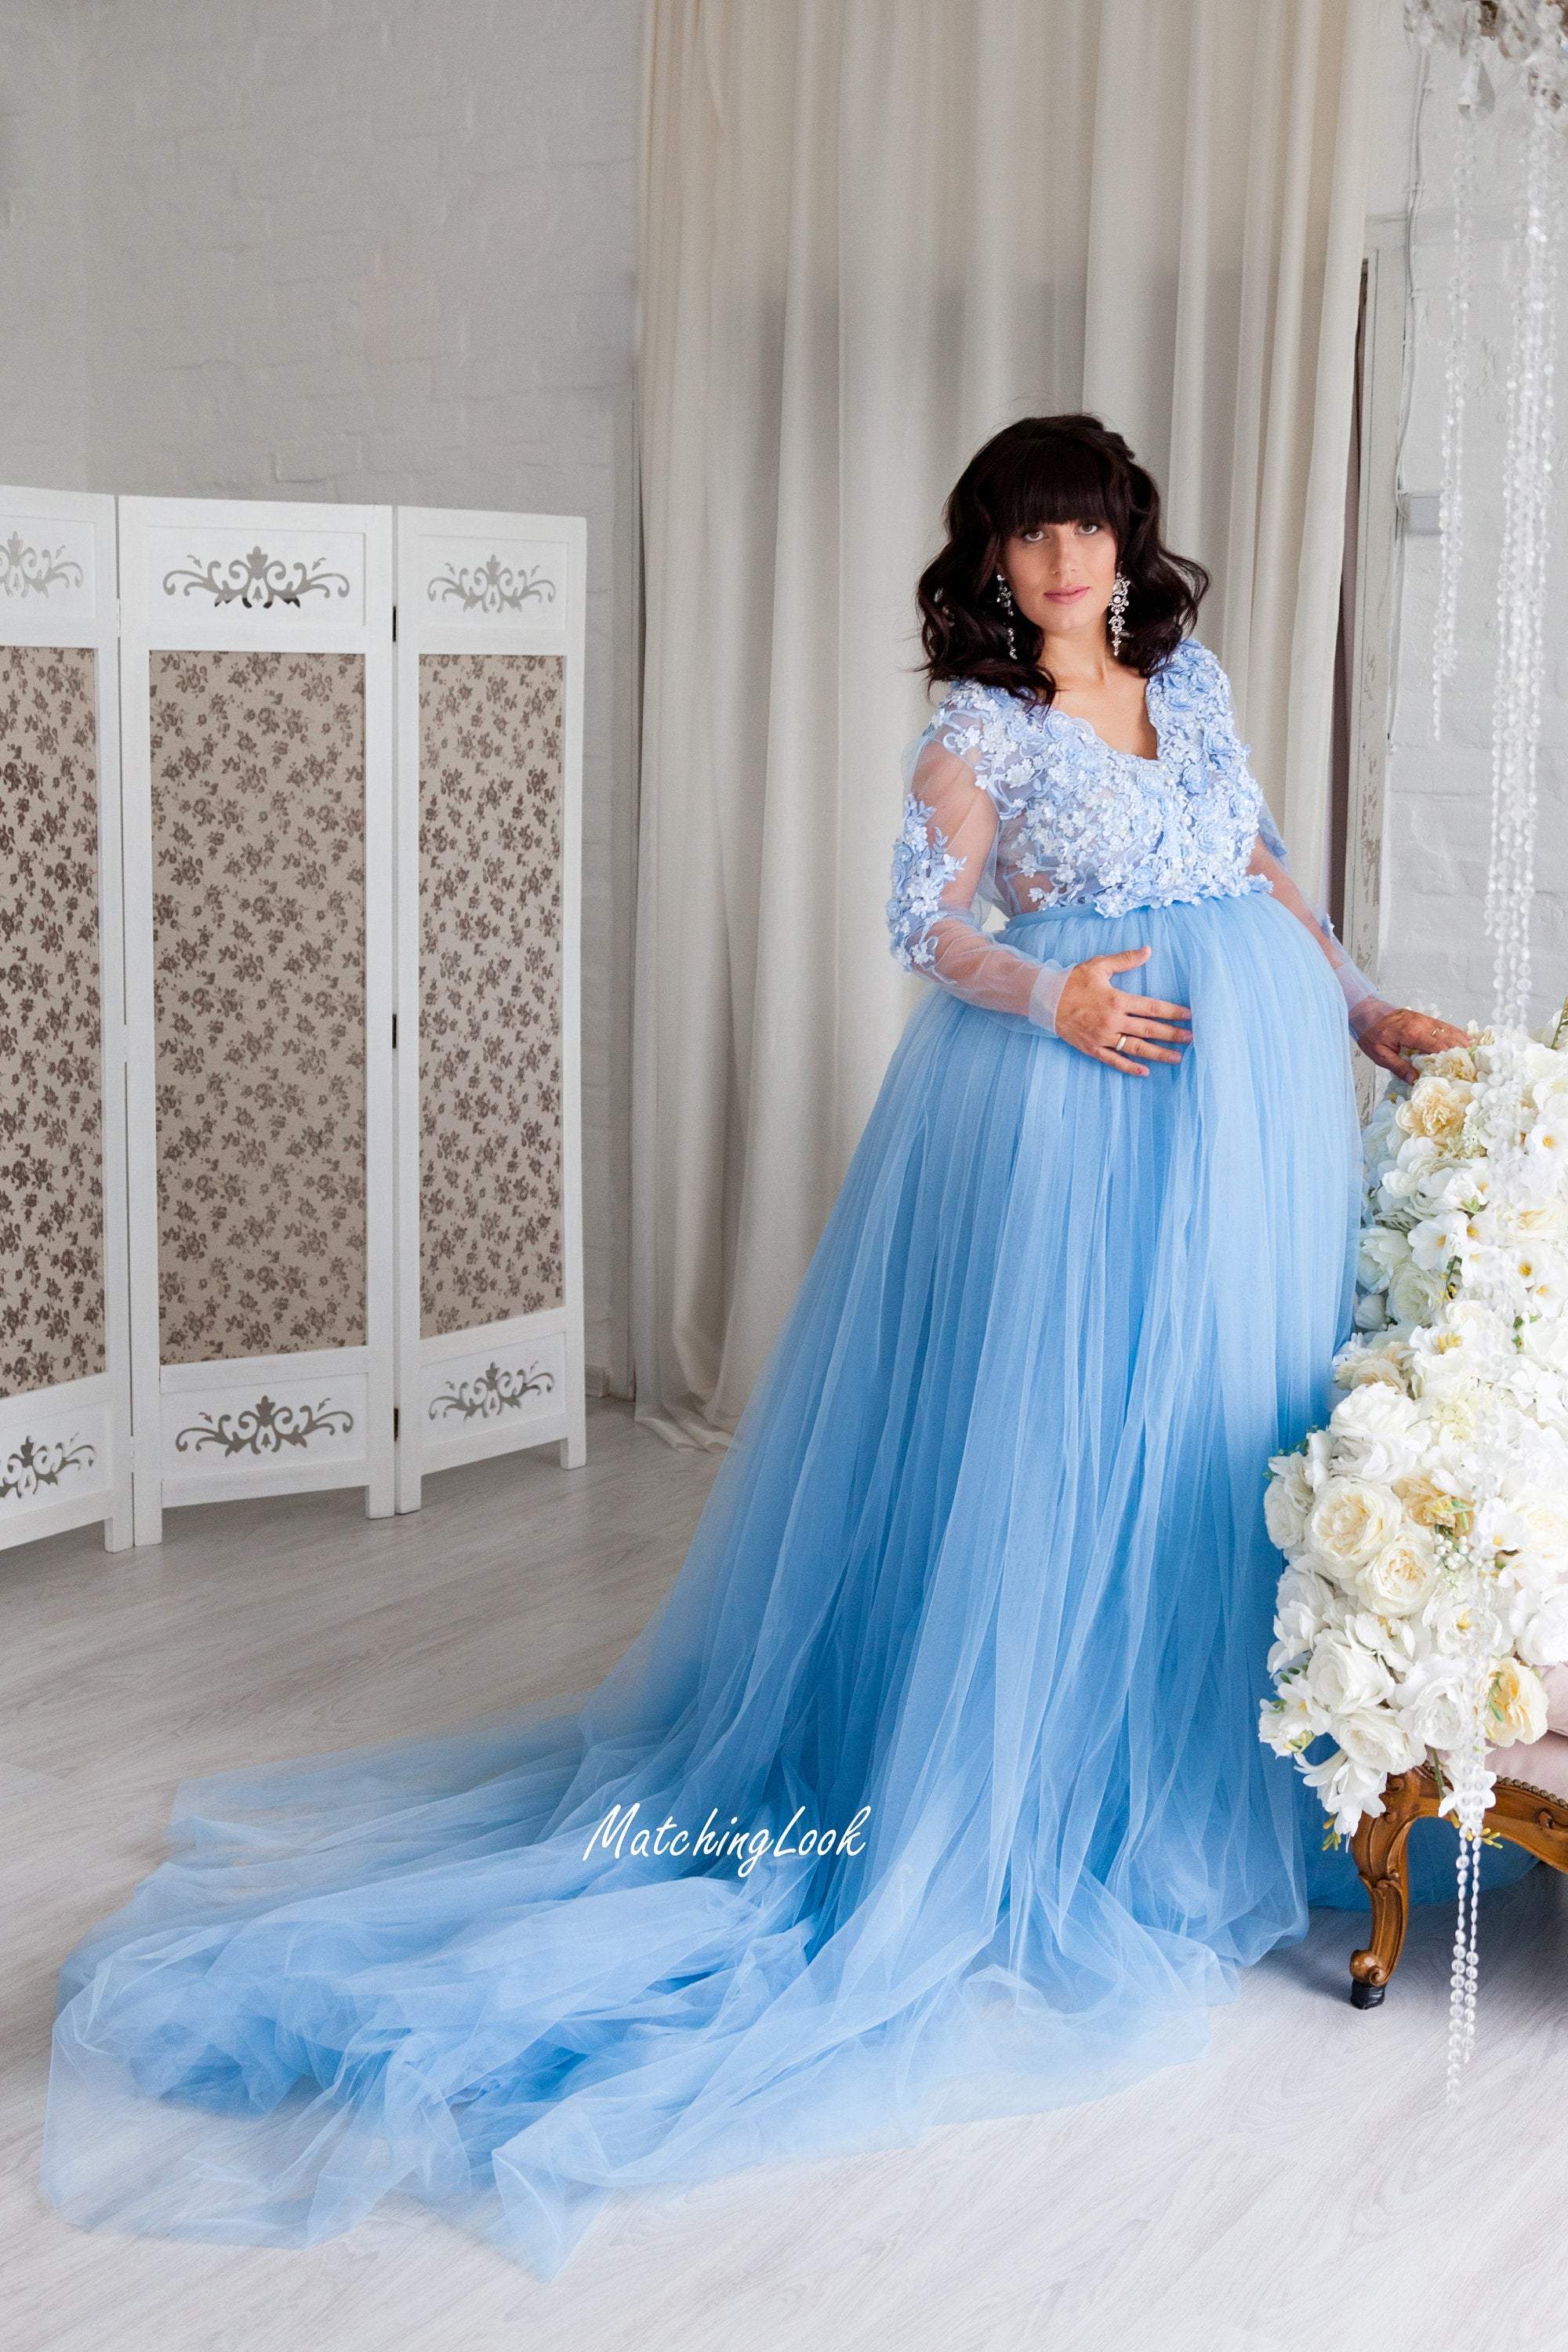 High Quality Sleeveless Elegant Chiffon Dress Lace Maternity Dresses for  Photos Shoot Photography Props Long Dresses Pregnant Women Maternity  Clothes Fancy Pregnancy Dress | Wish